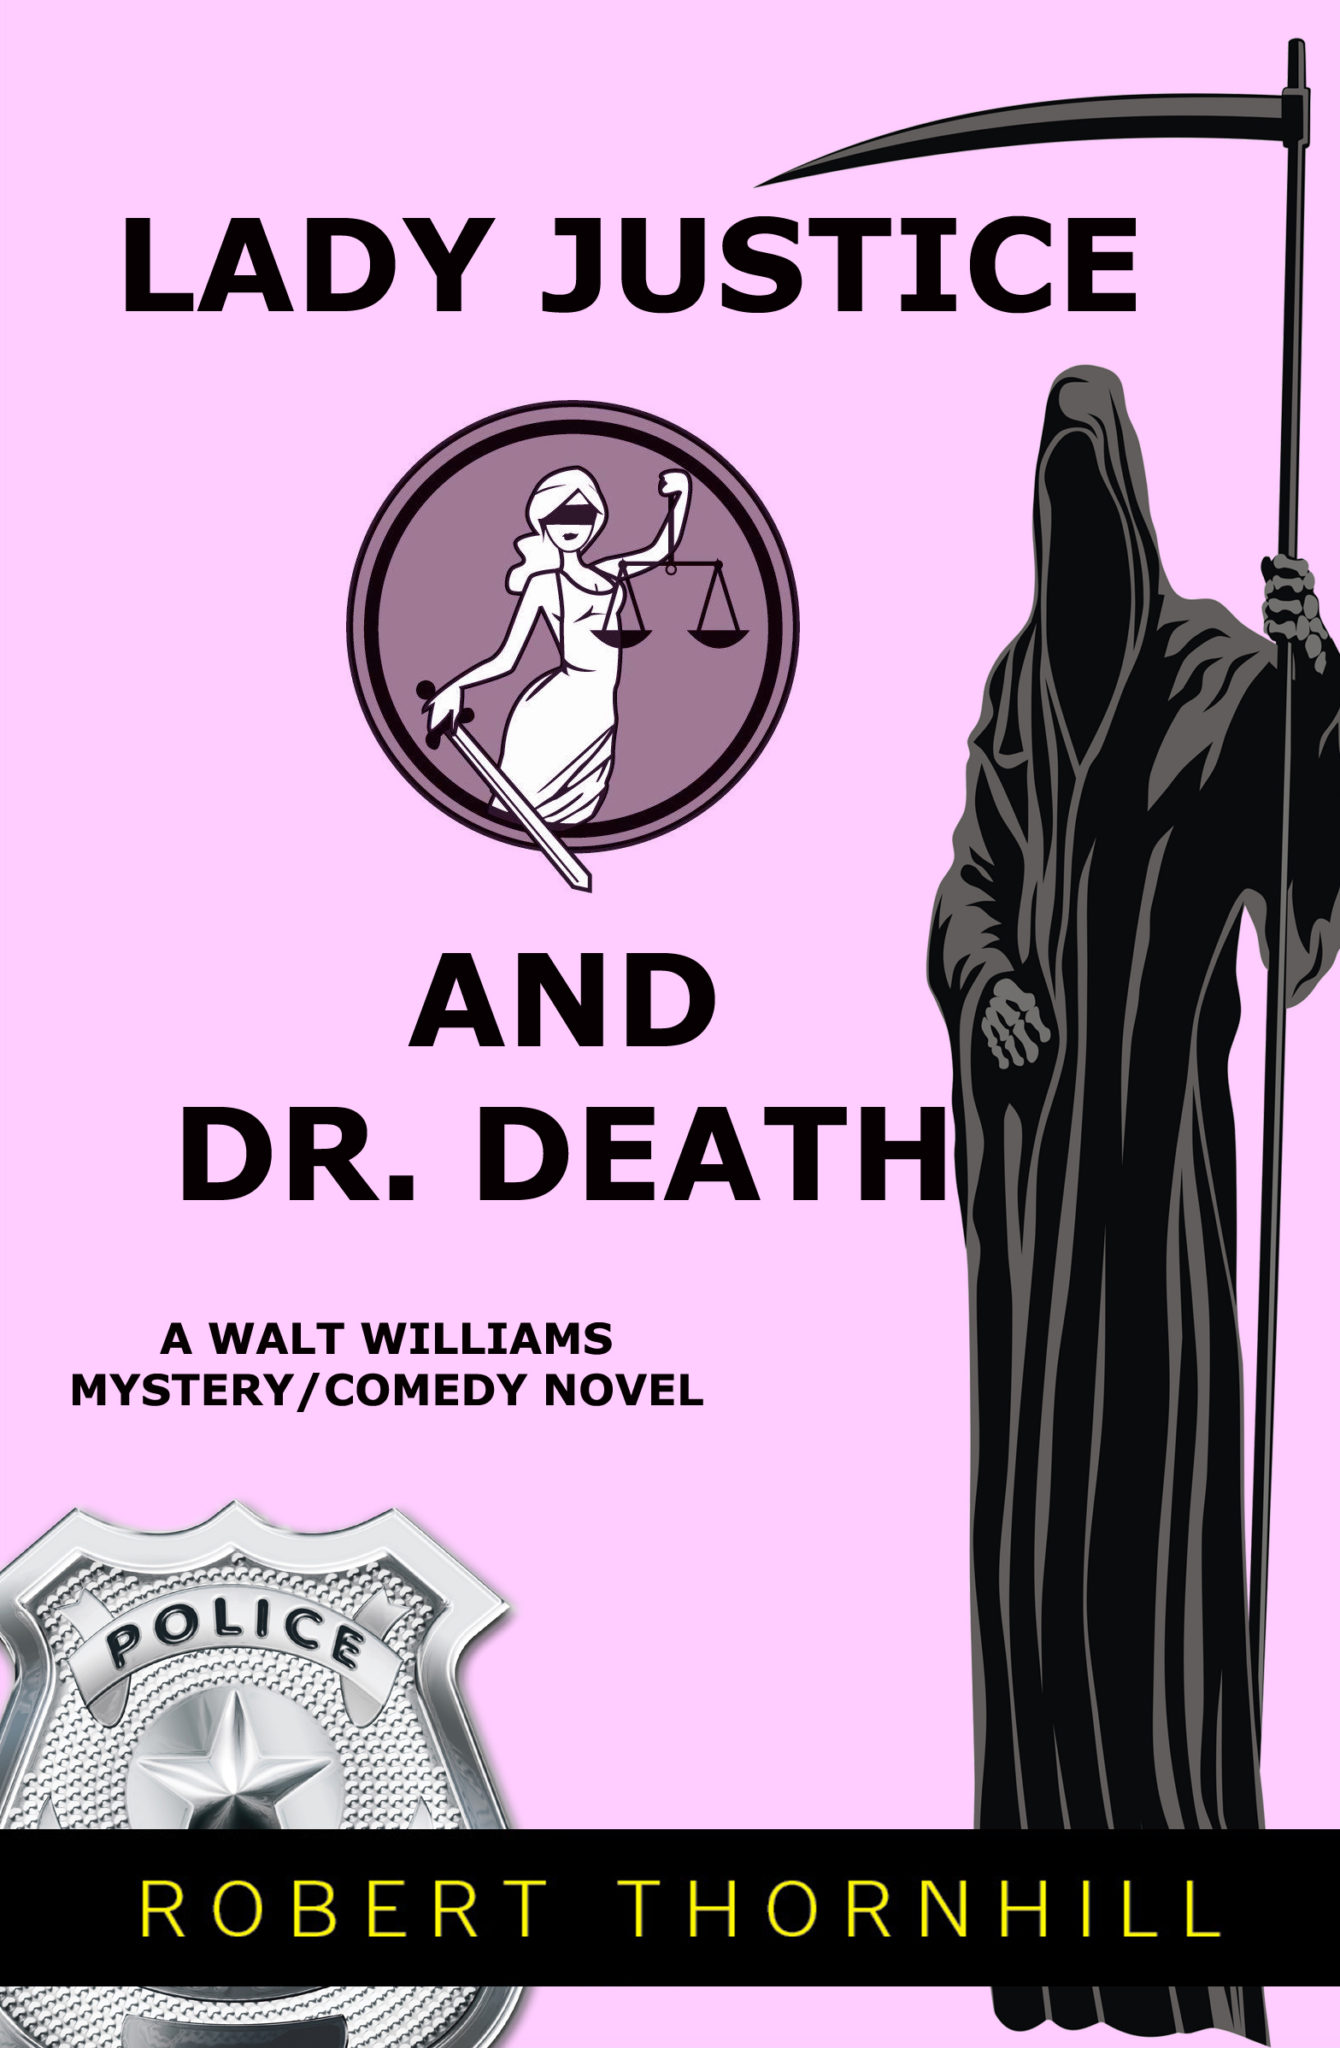 FREE: Lady Justice and Dr. Death by Robert Thornhill